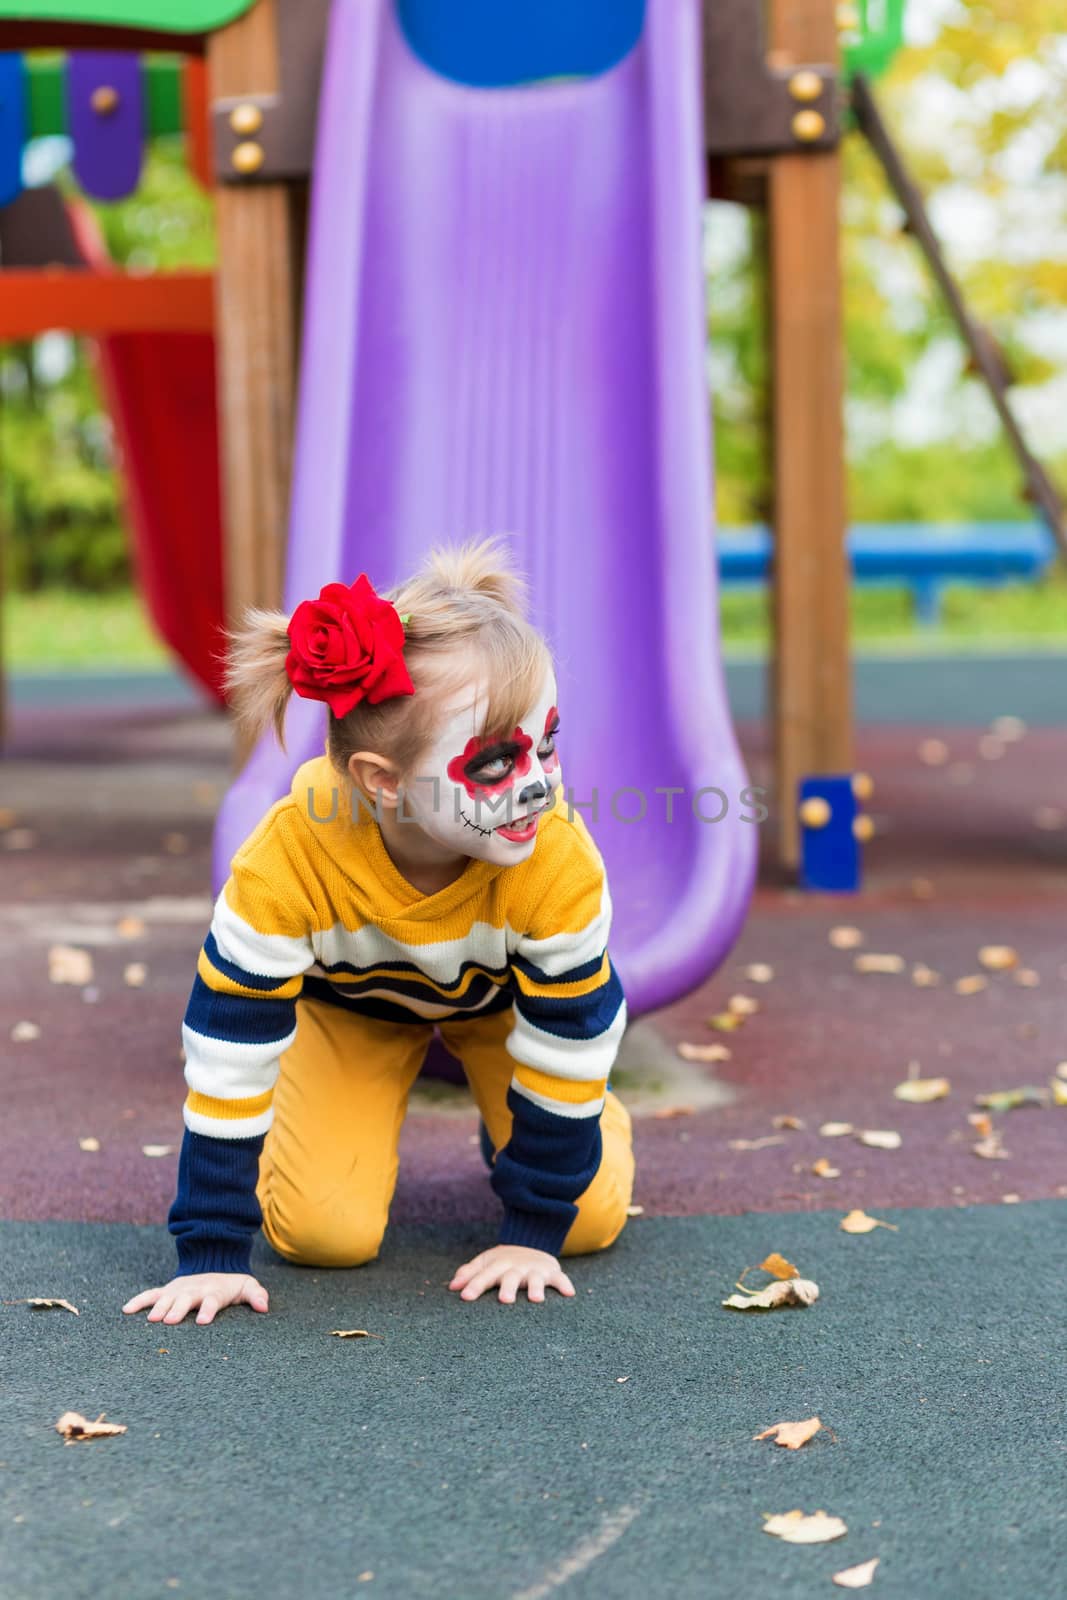 A little preschool girl with Painted Face, rides a slide on the playground, celebrates Halloween or Mexican Day of the Dead.